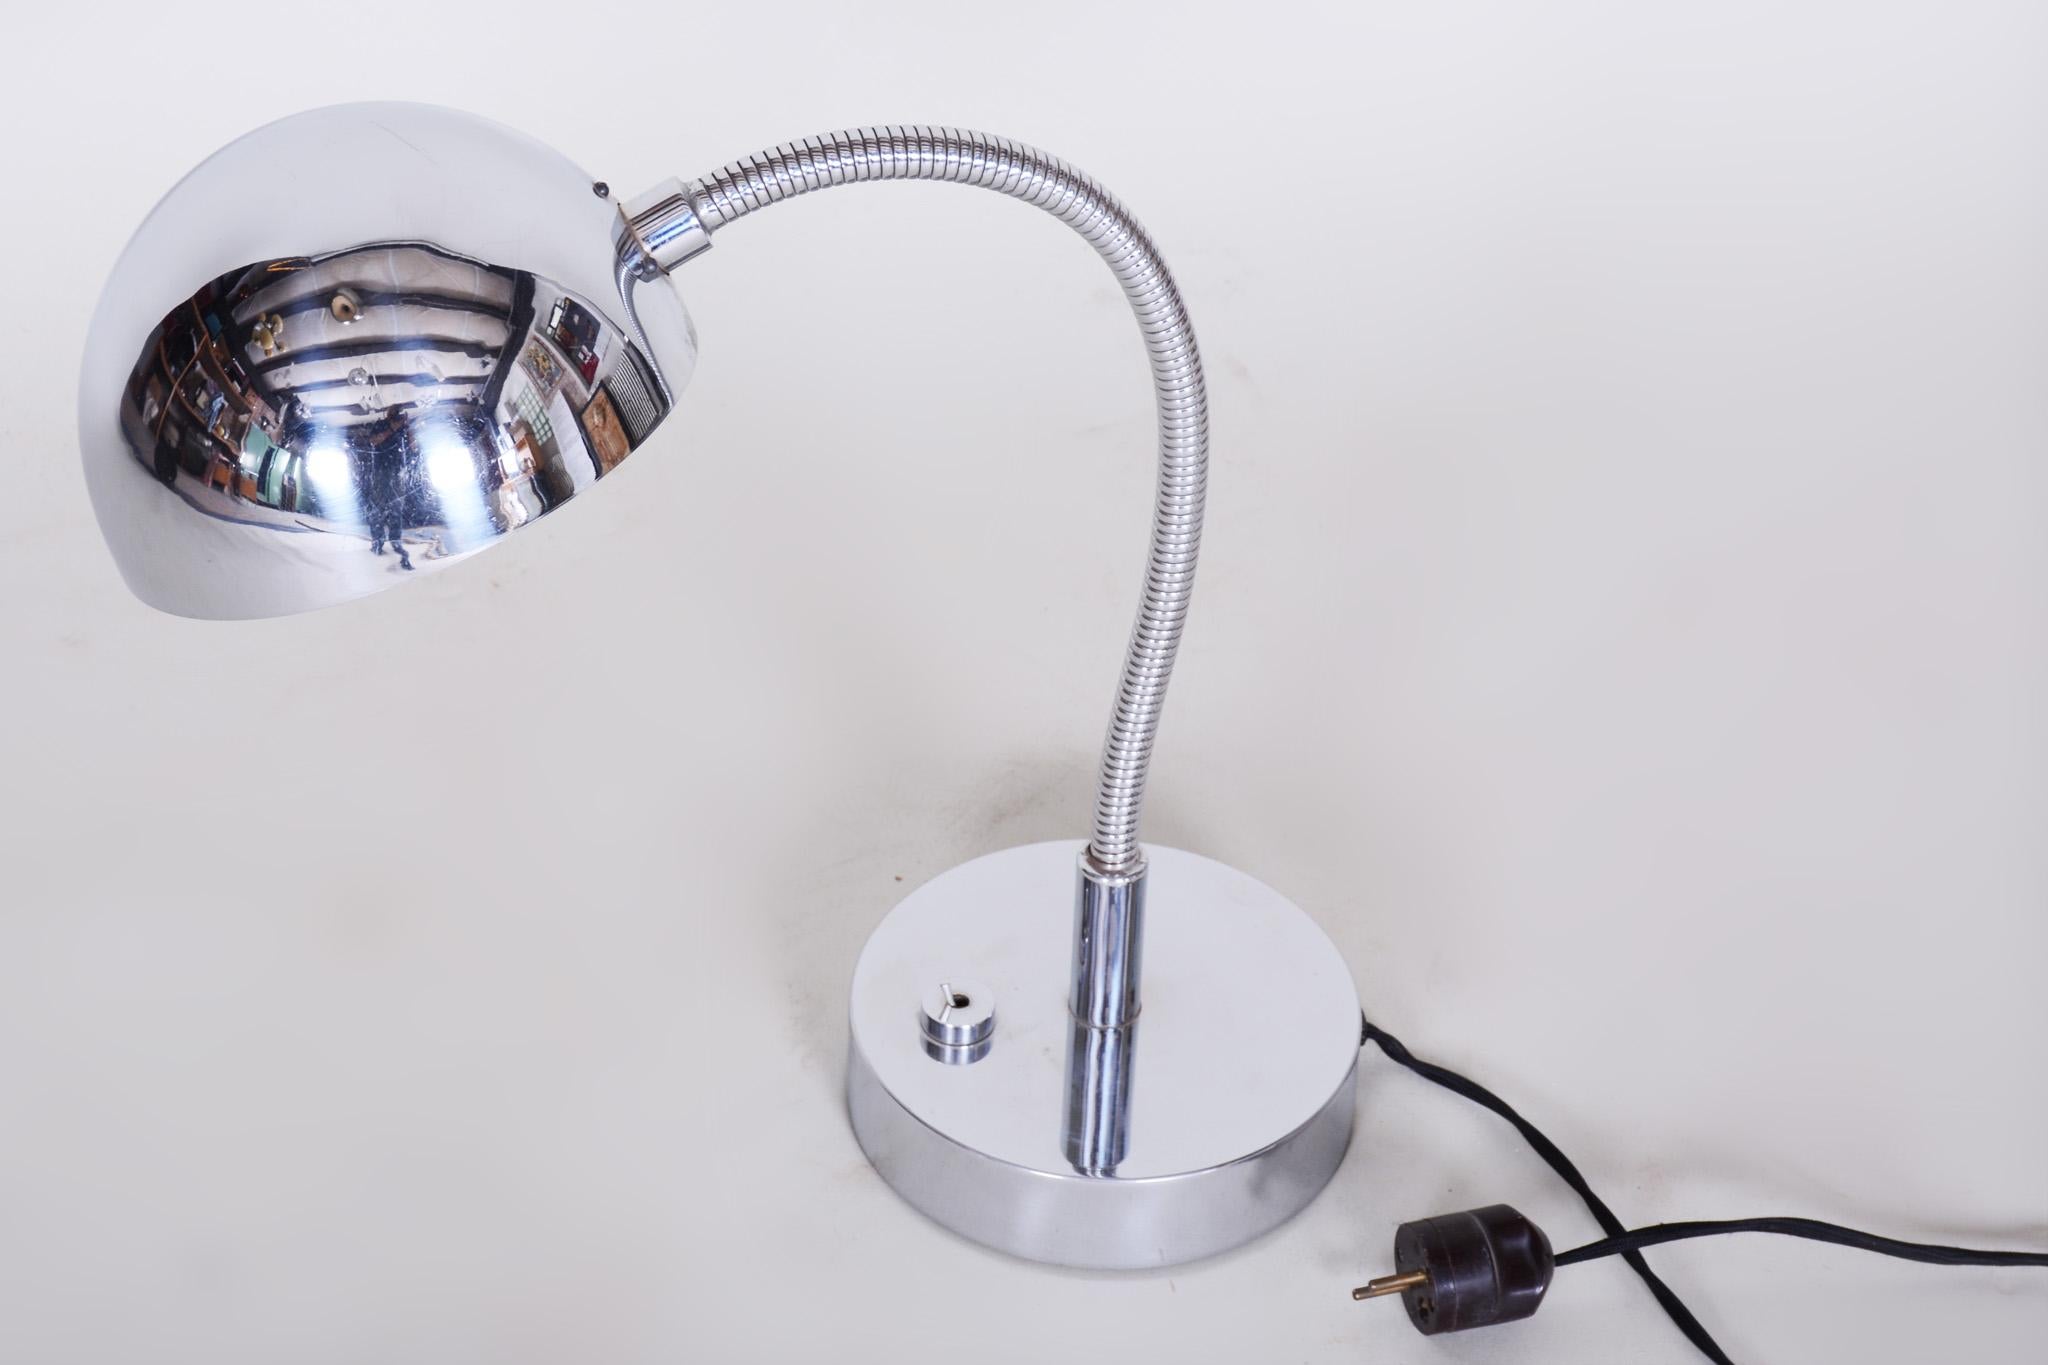 Mid-20th Century Czech Chrome Functionalism Bauhaus Table Lamp, Restored and Electrified, 1930s